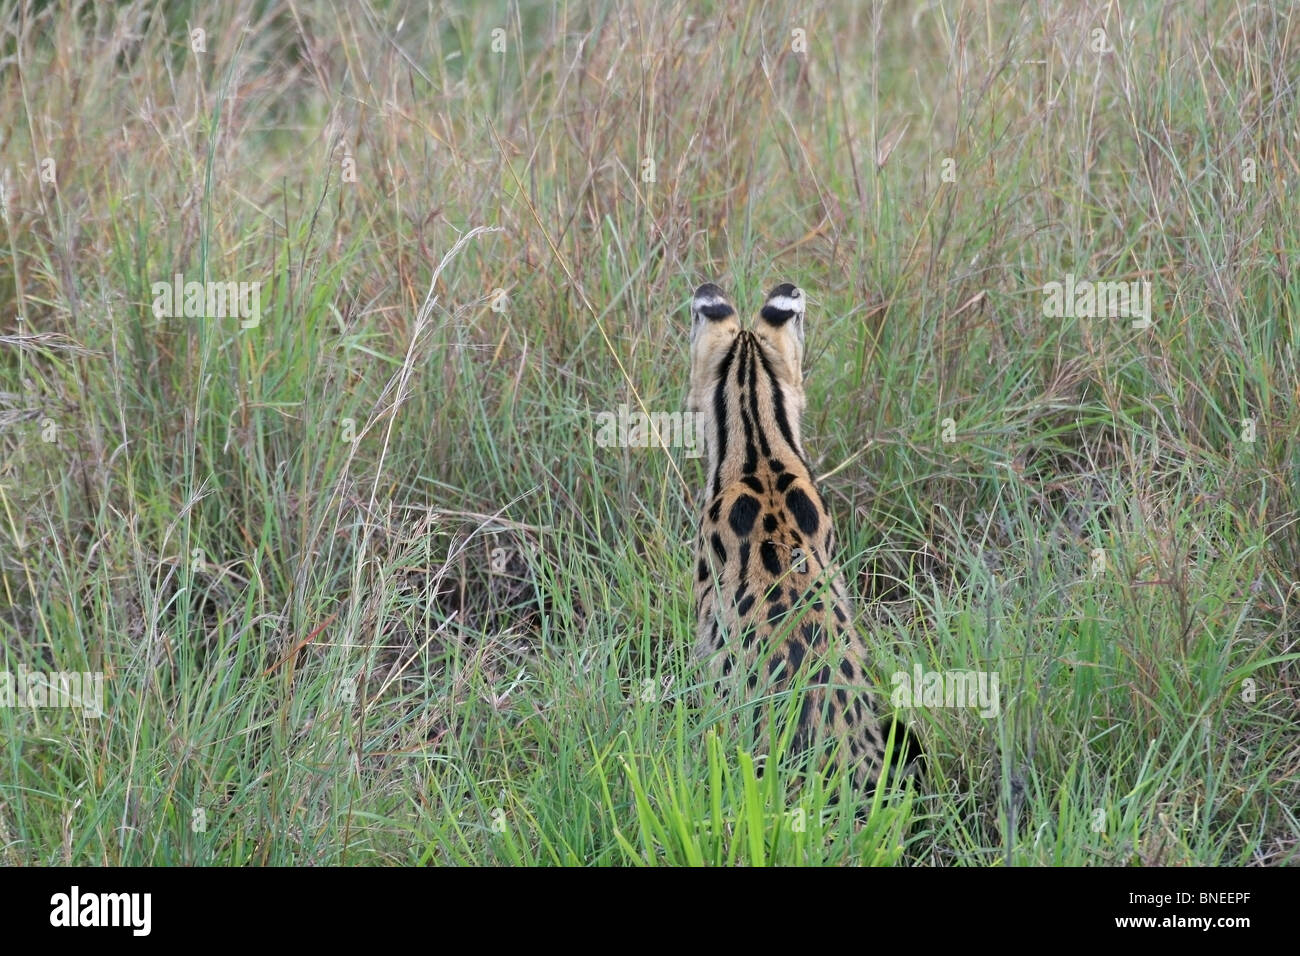 A Serval looking for prey in the grasslands of Masai Mara National Reserve, Kenya, East Africa Stock Photo